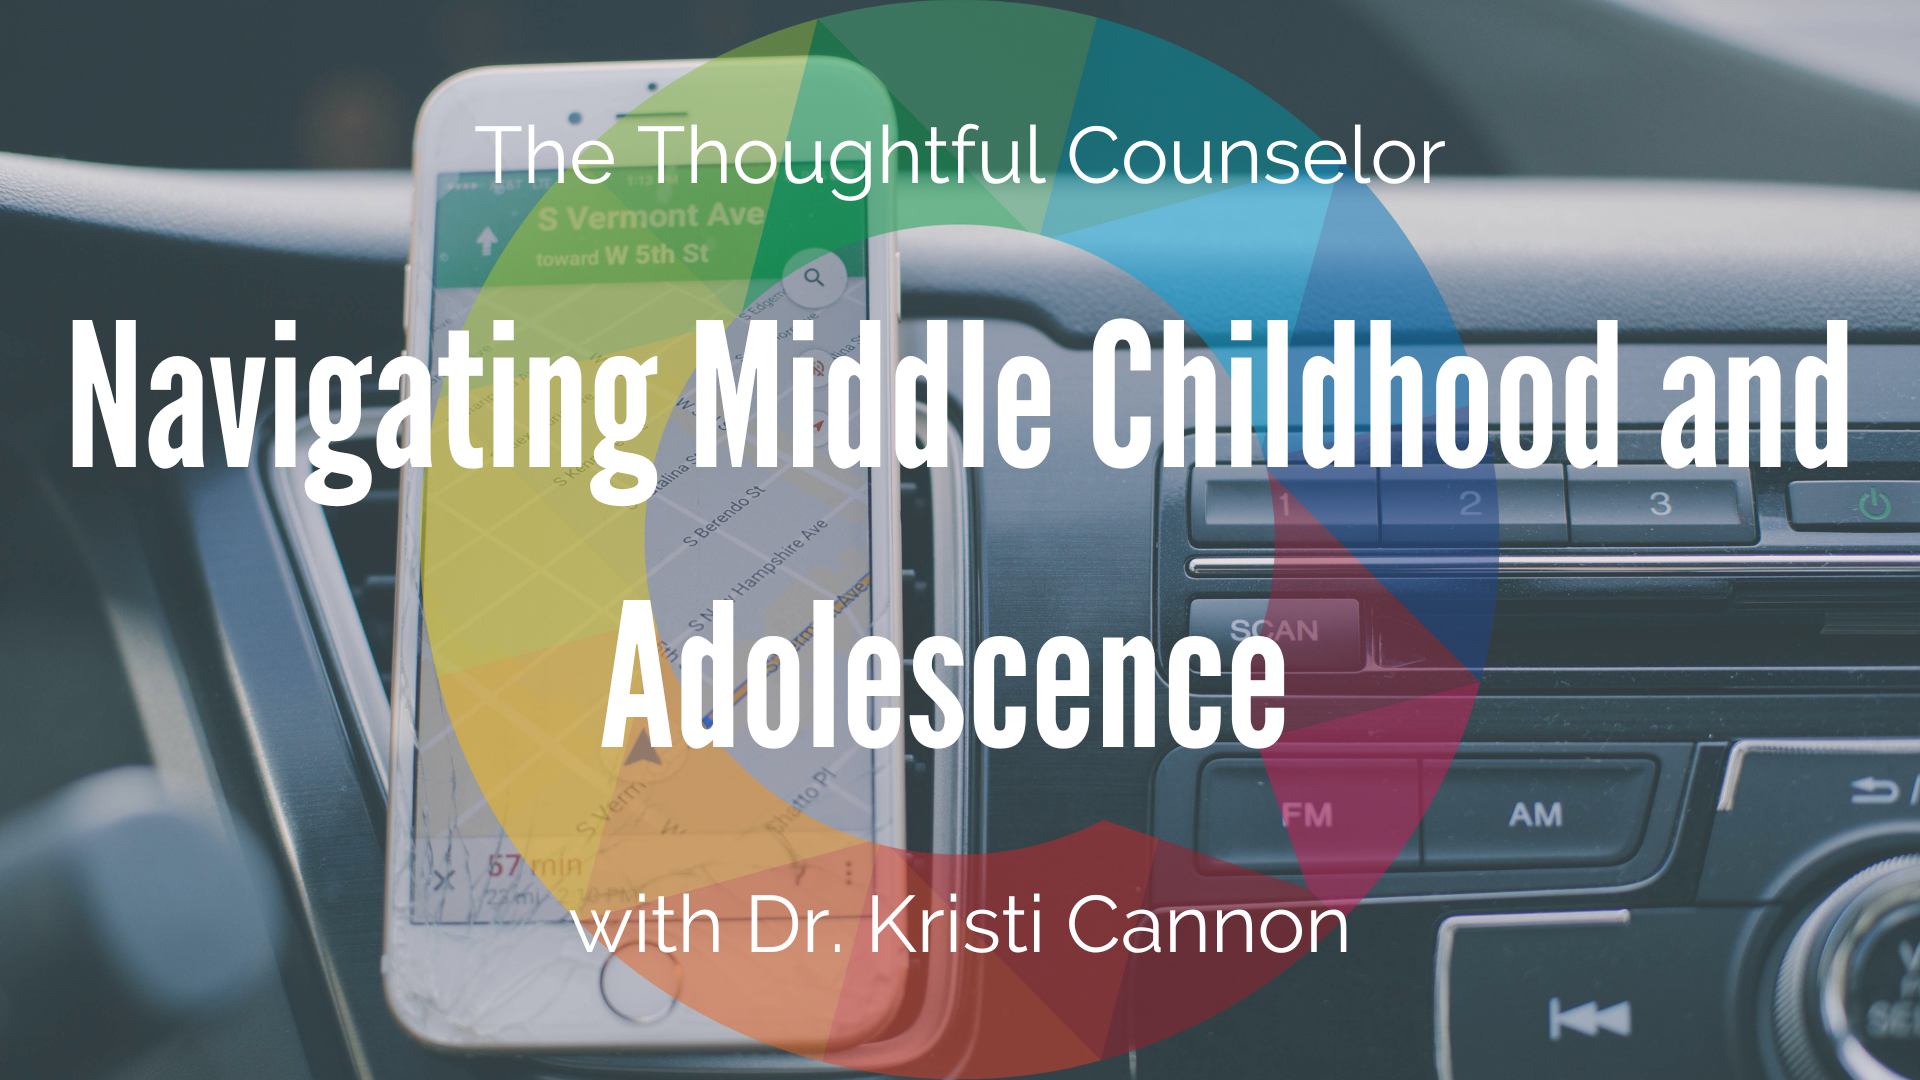 Navigating Middle Childhood and Adolescent Development with Empathy